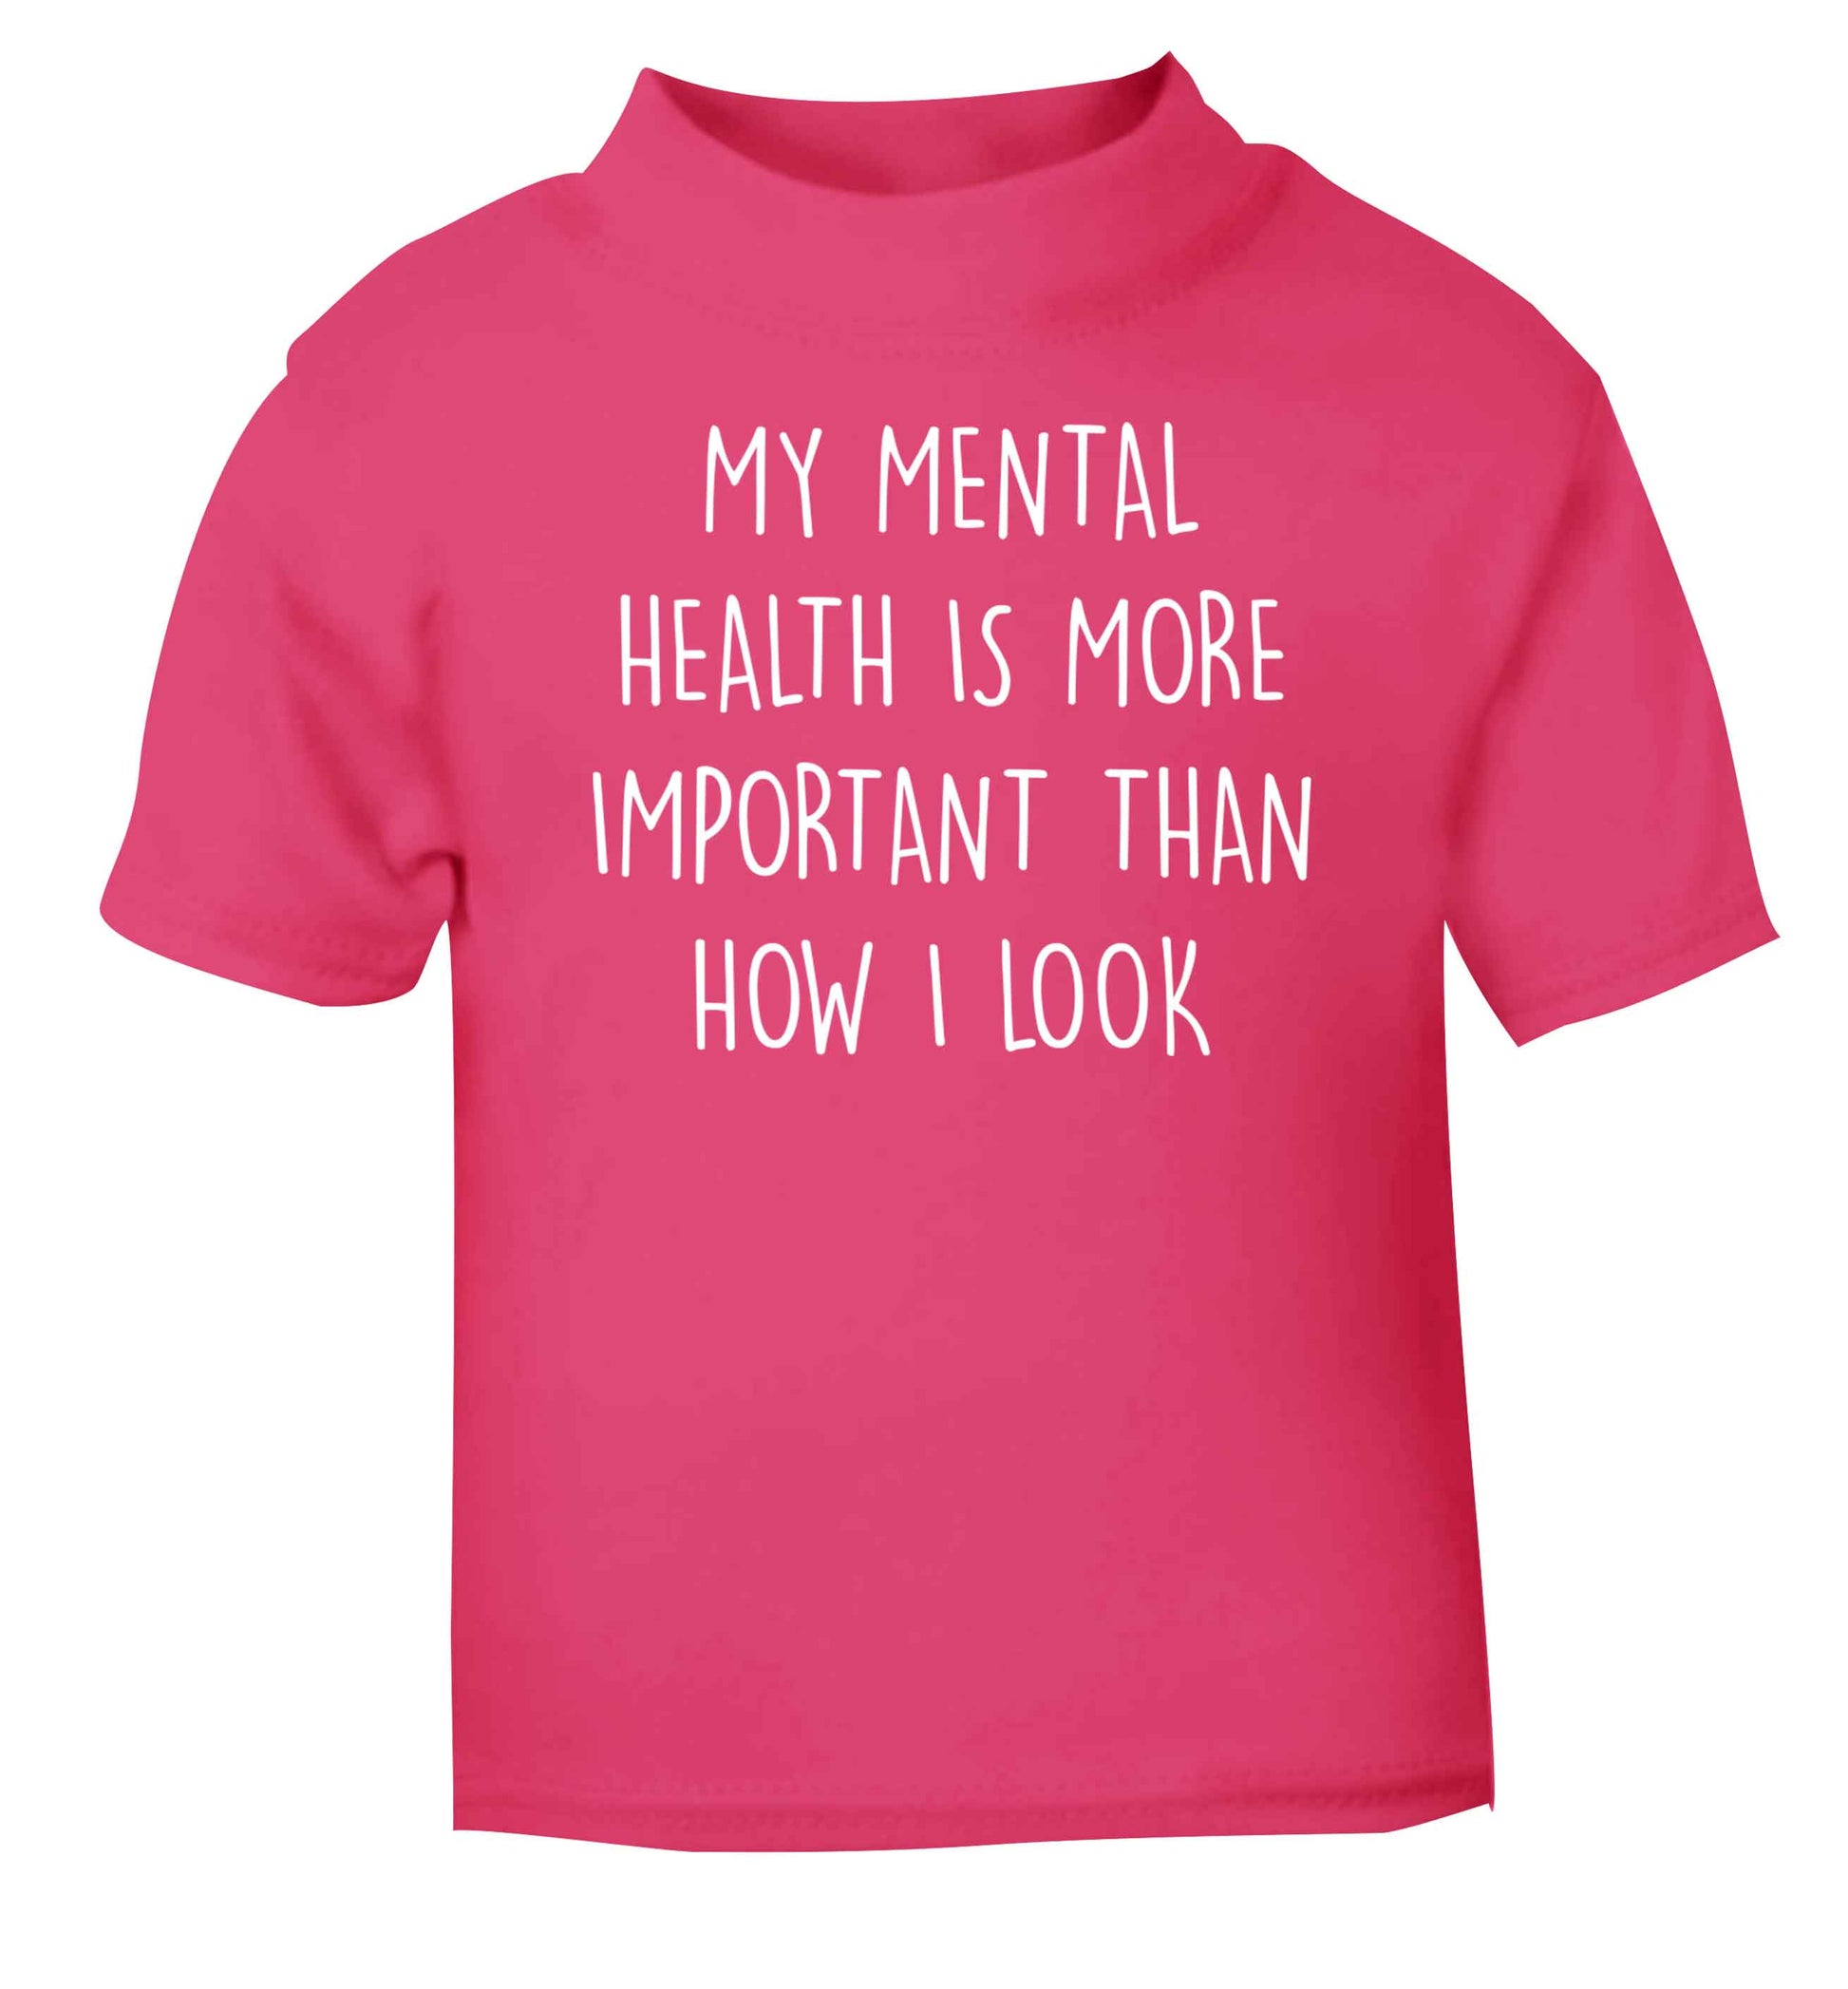 My mental health is more importnat than how I look pink baby toddler Tshirt 2 Years